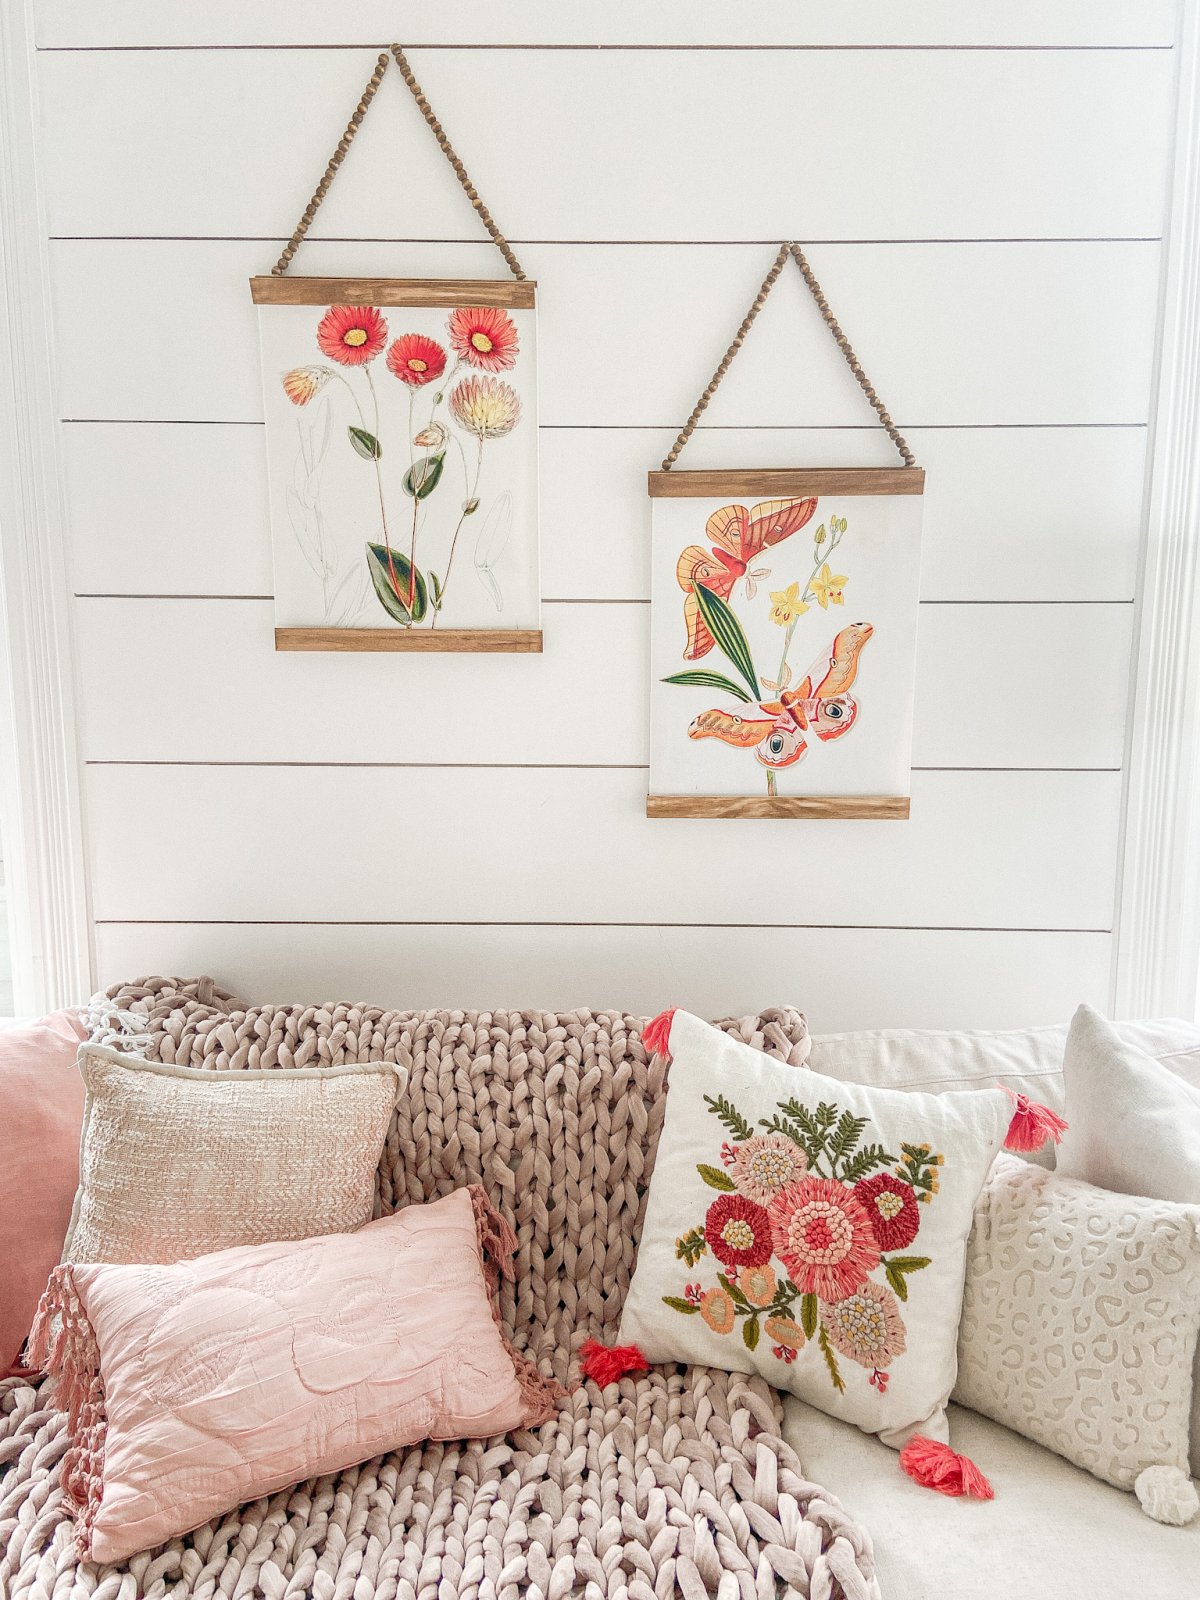 Spring Botanical Prints with DIY Beaded Hangers. Bring a little spring color into your home and make beaded hangers for less than $5!